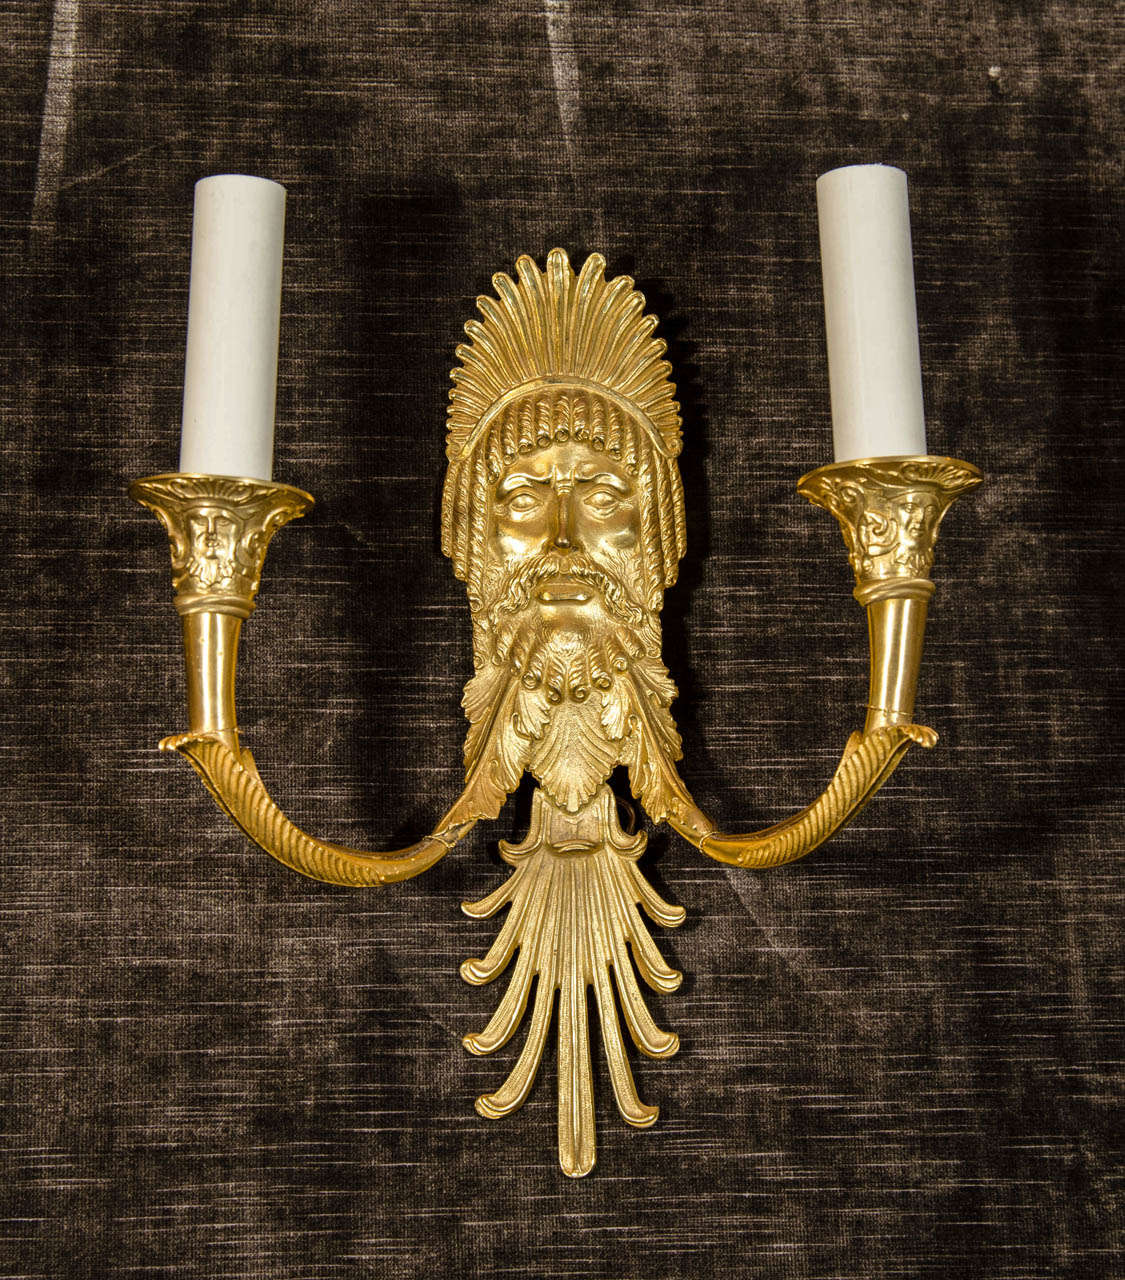 A set of eight superb French Empire style gilt bronze figural double light wall sconces of great quality embellished with fine figural masks of neoclassical men.